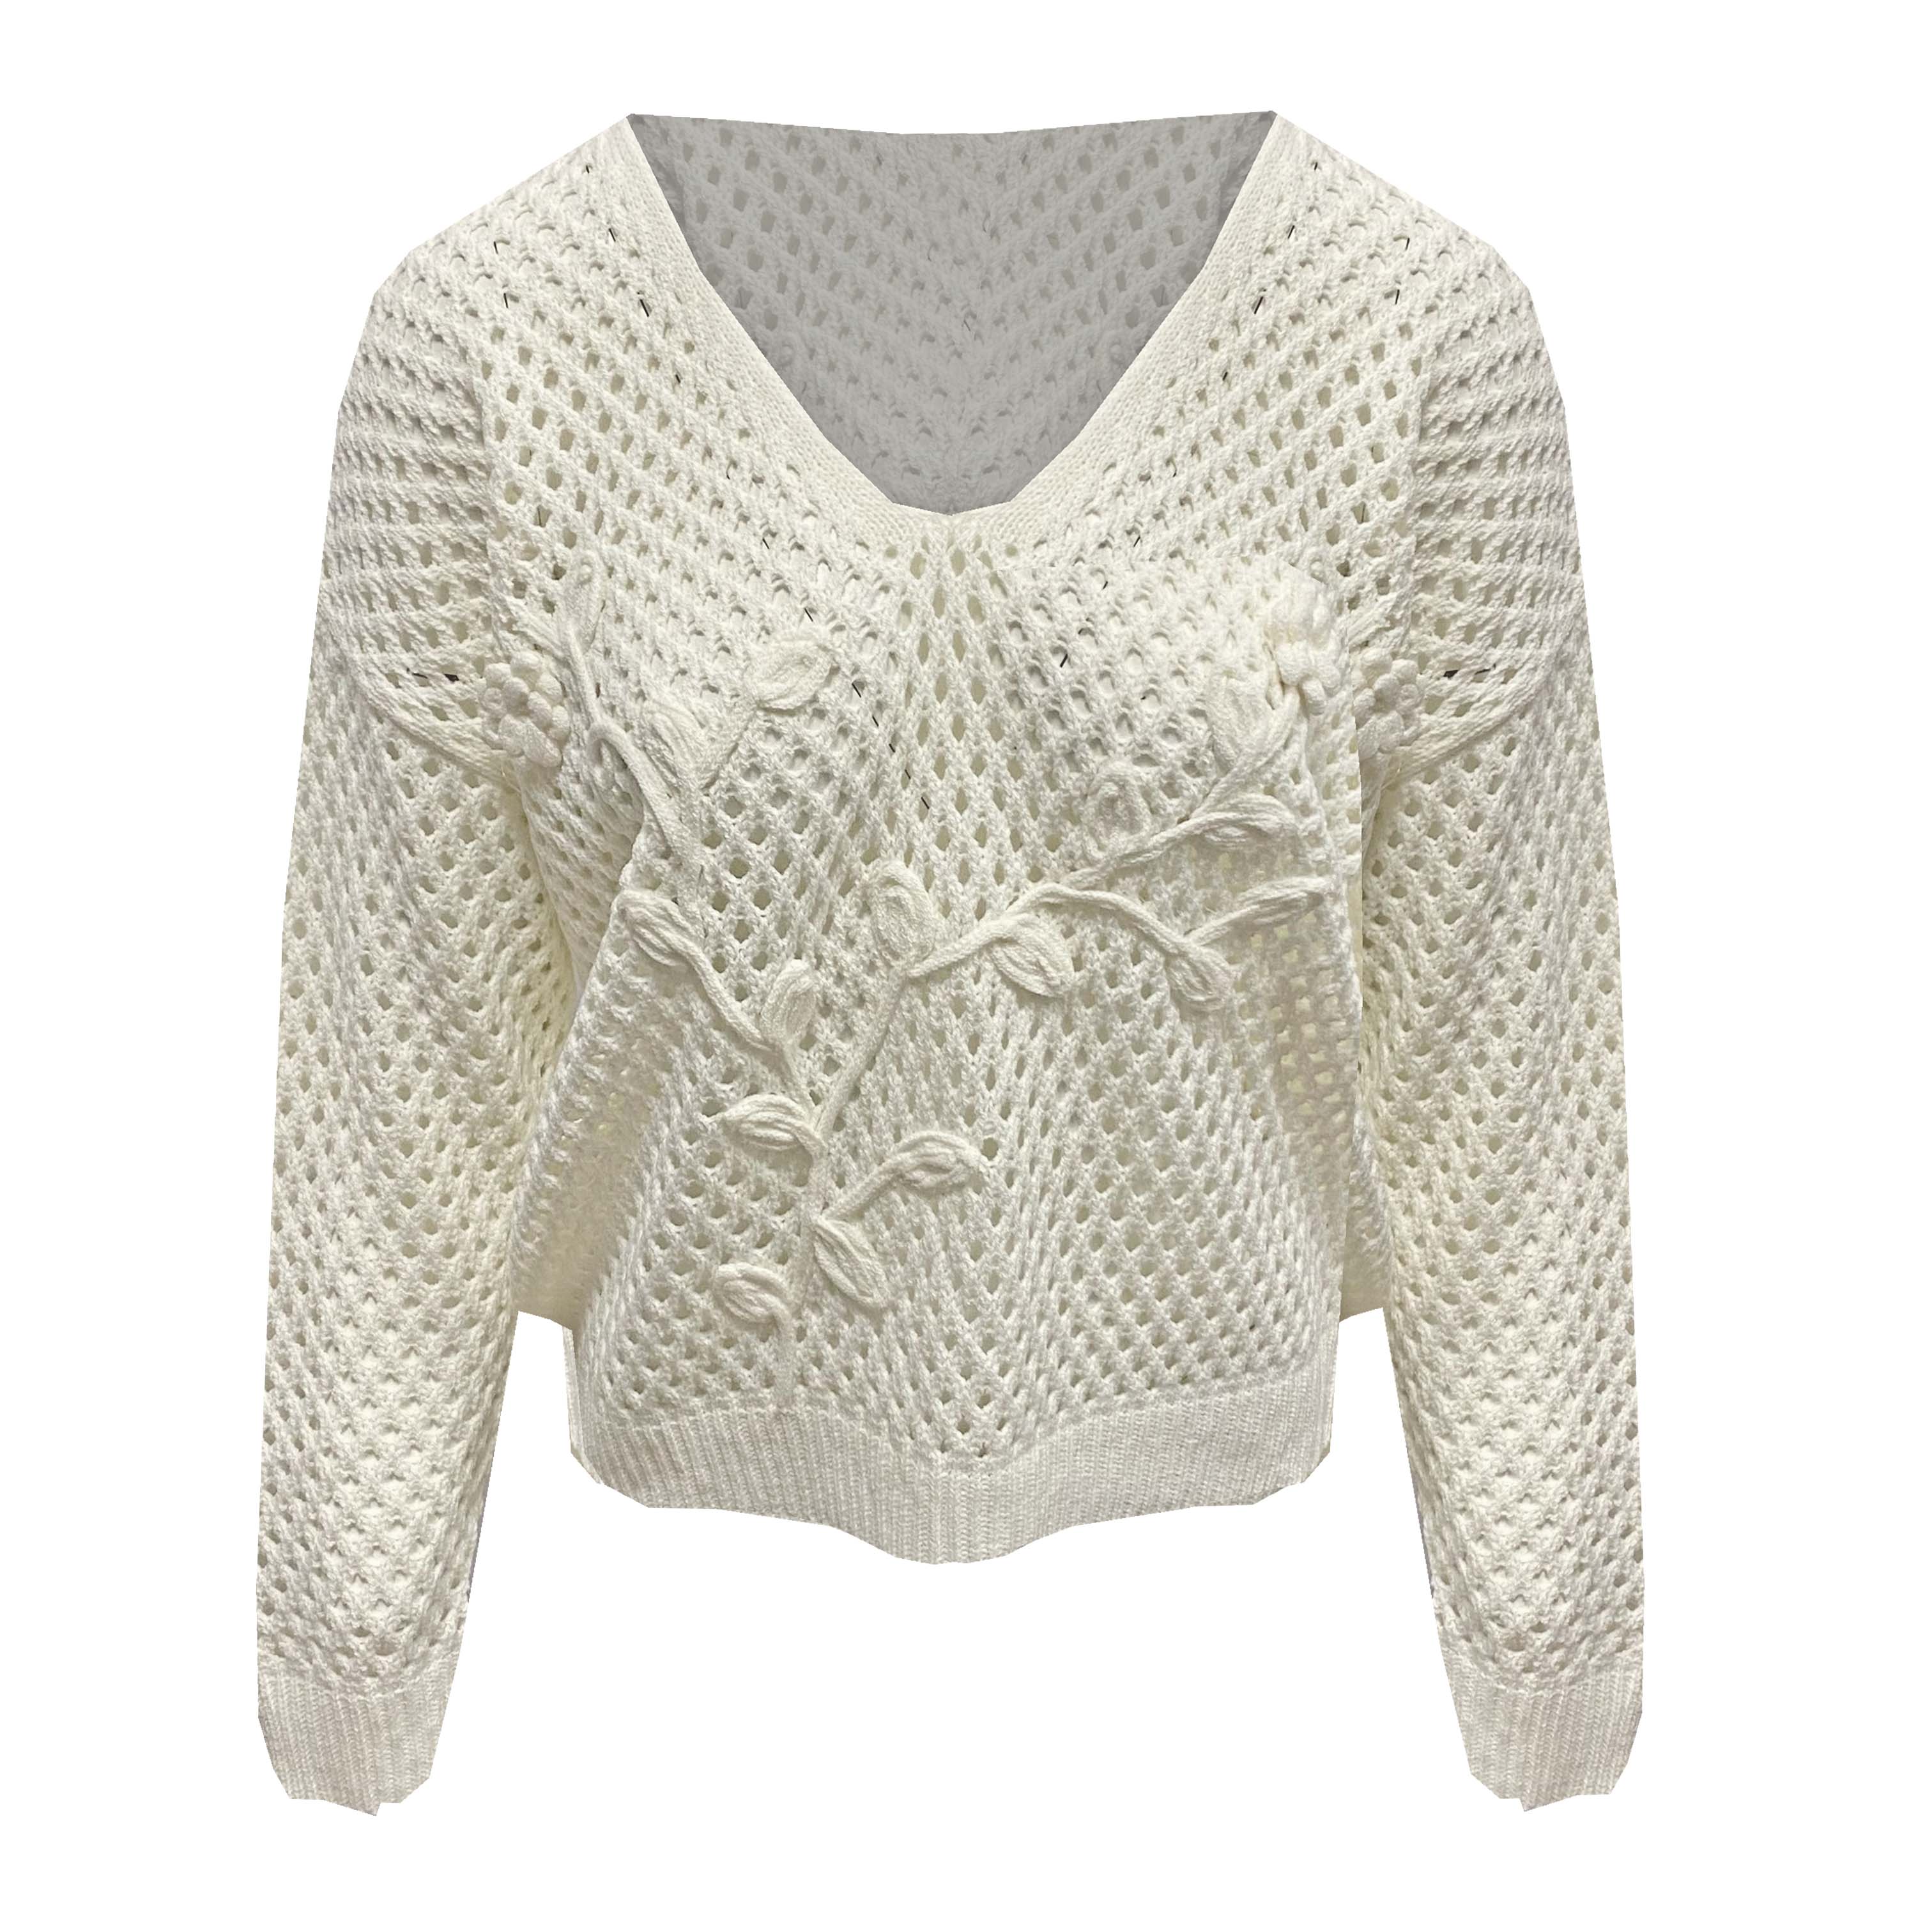 Knitted Sweater Flowers C8020